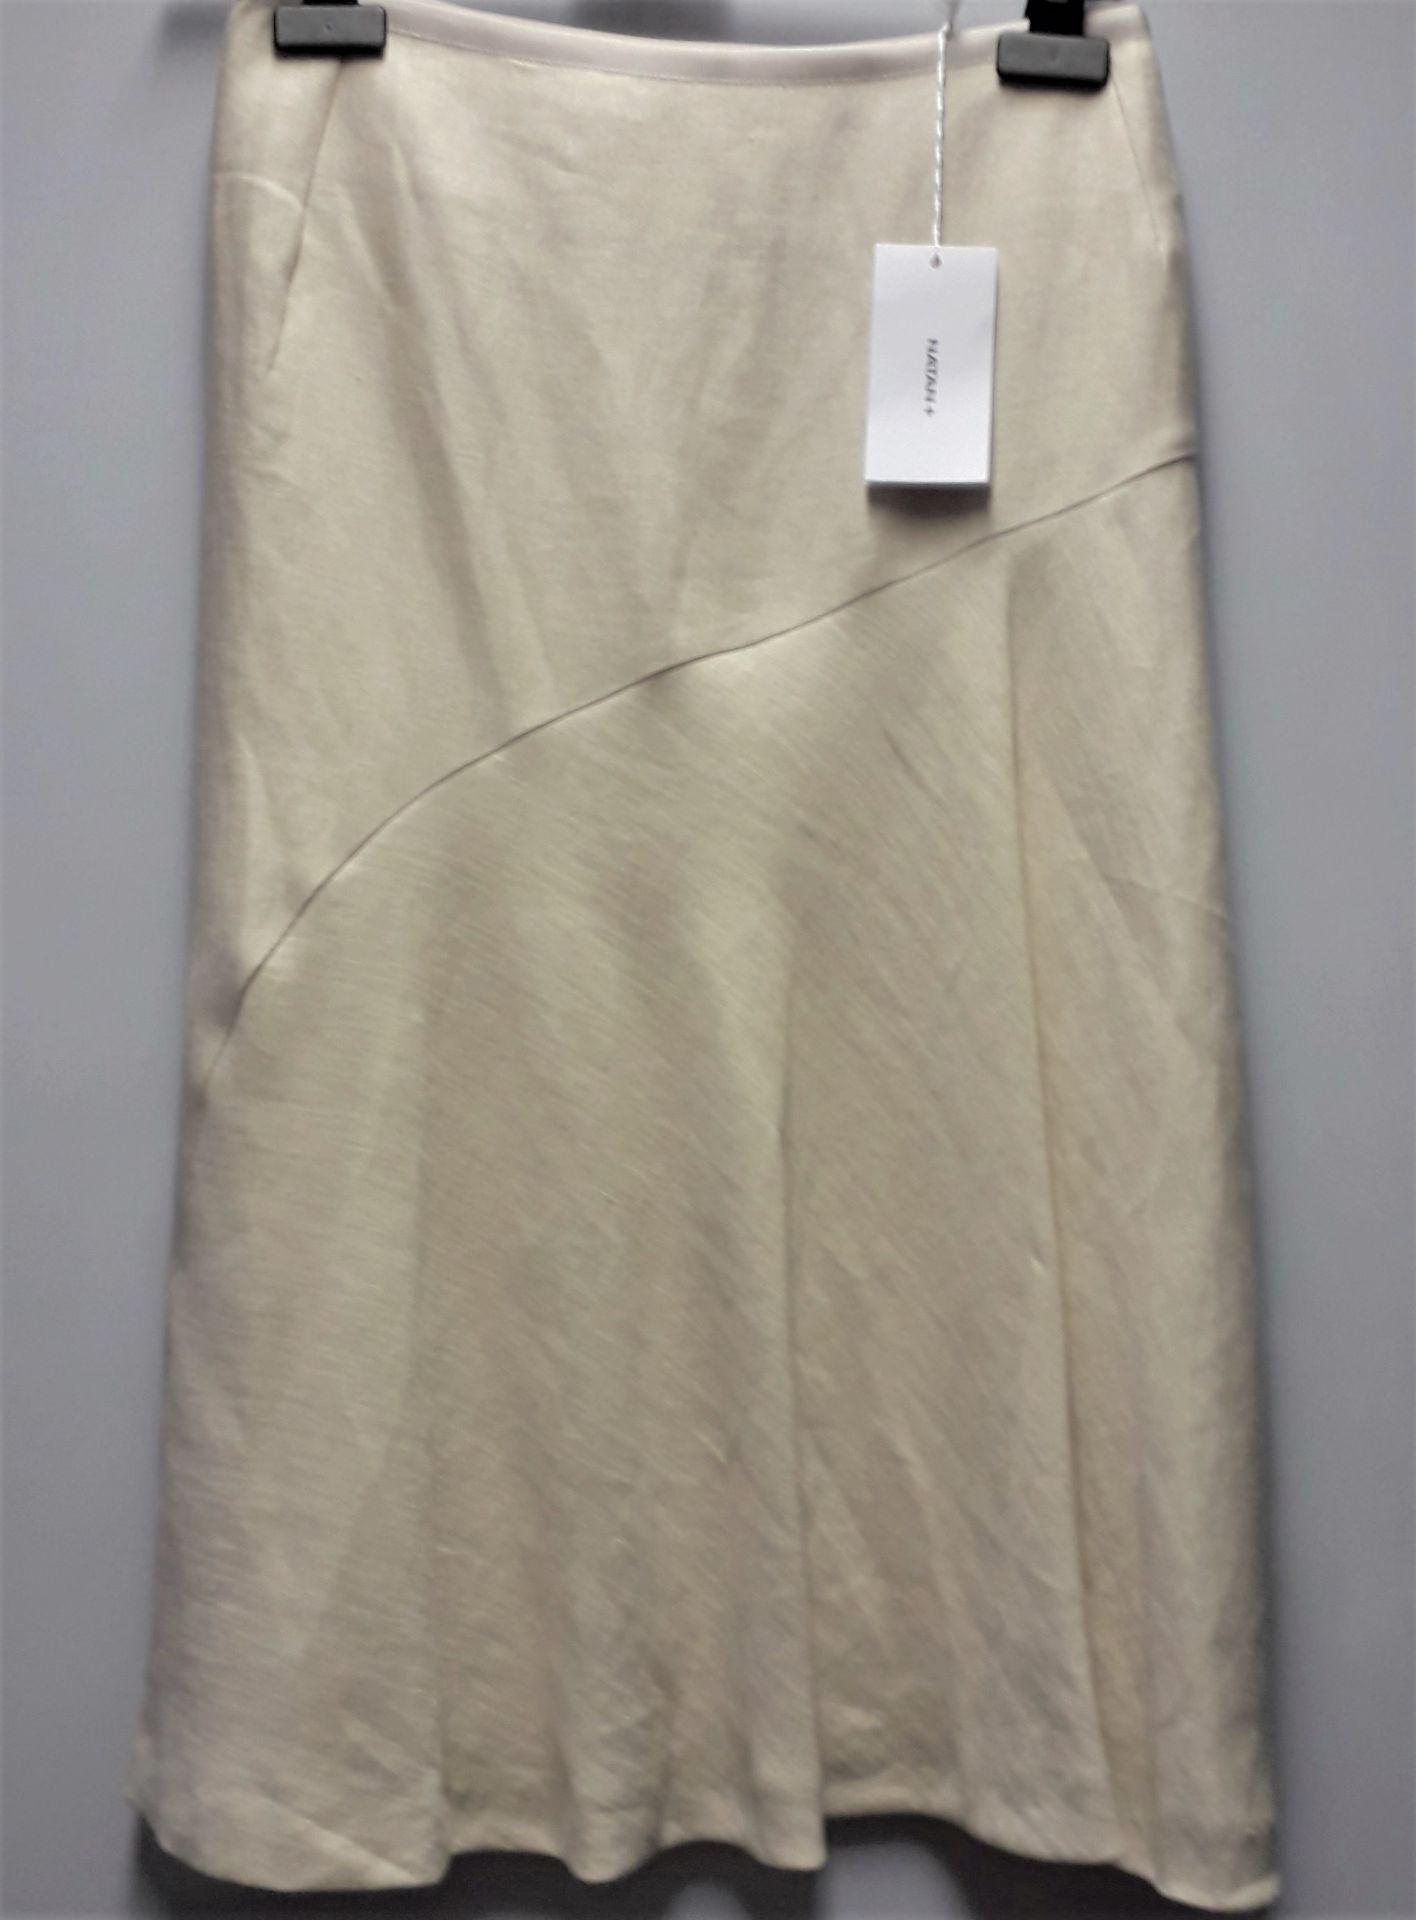 1 x Natan Plus Oatmeal A-Line Skirt - Size: 22 - Material: 100% Linen - From a High End Clothing